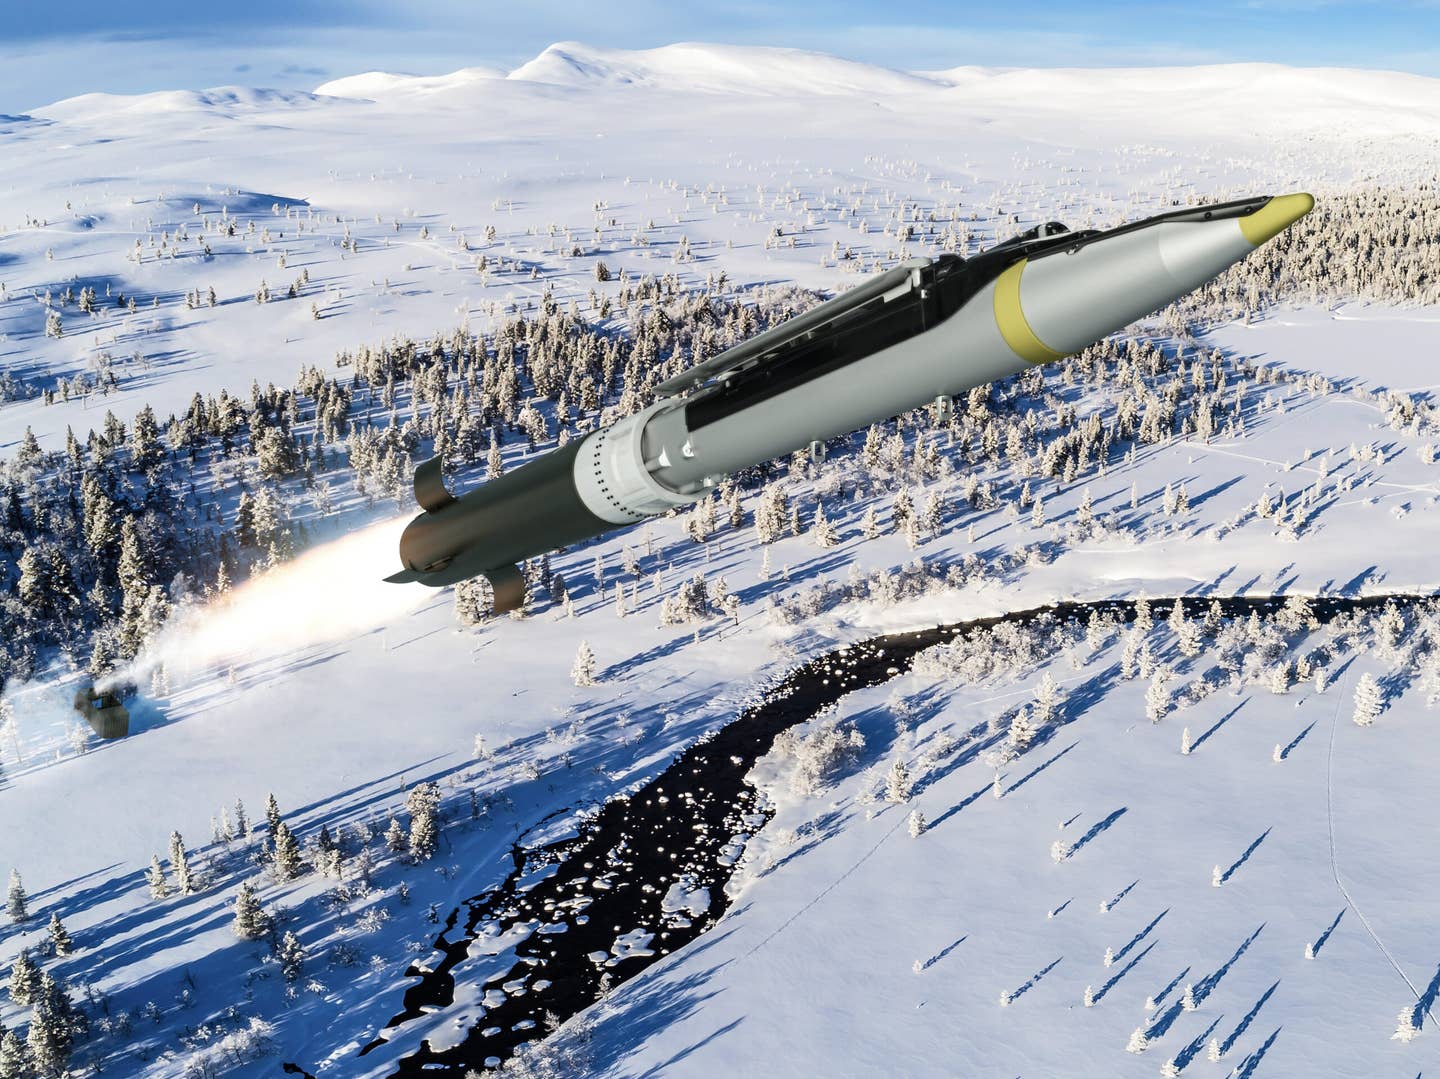 The GLSDB is propelled by its M26 rocket motor before the pop-out wings deploy for the final unpowered run-in to the target. <em>Saab</em>